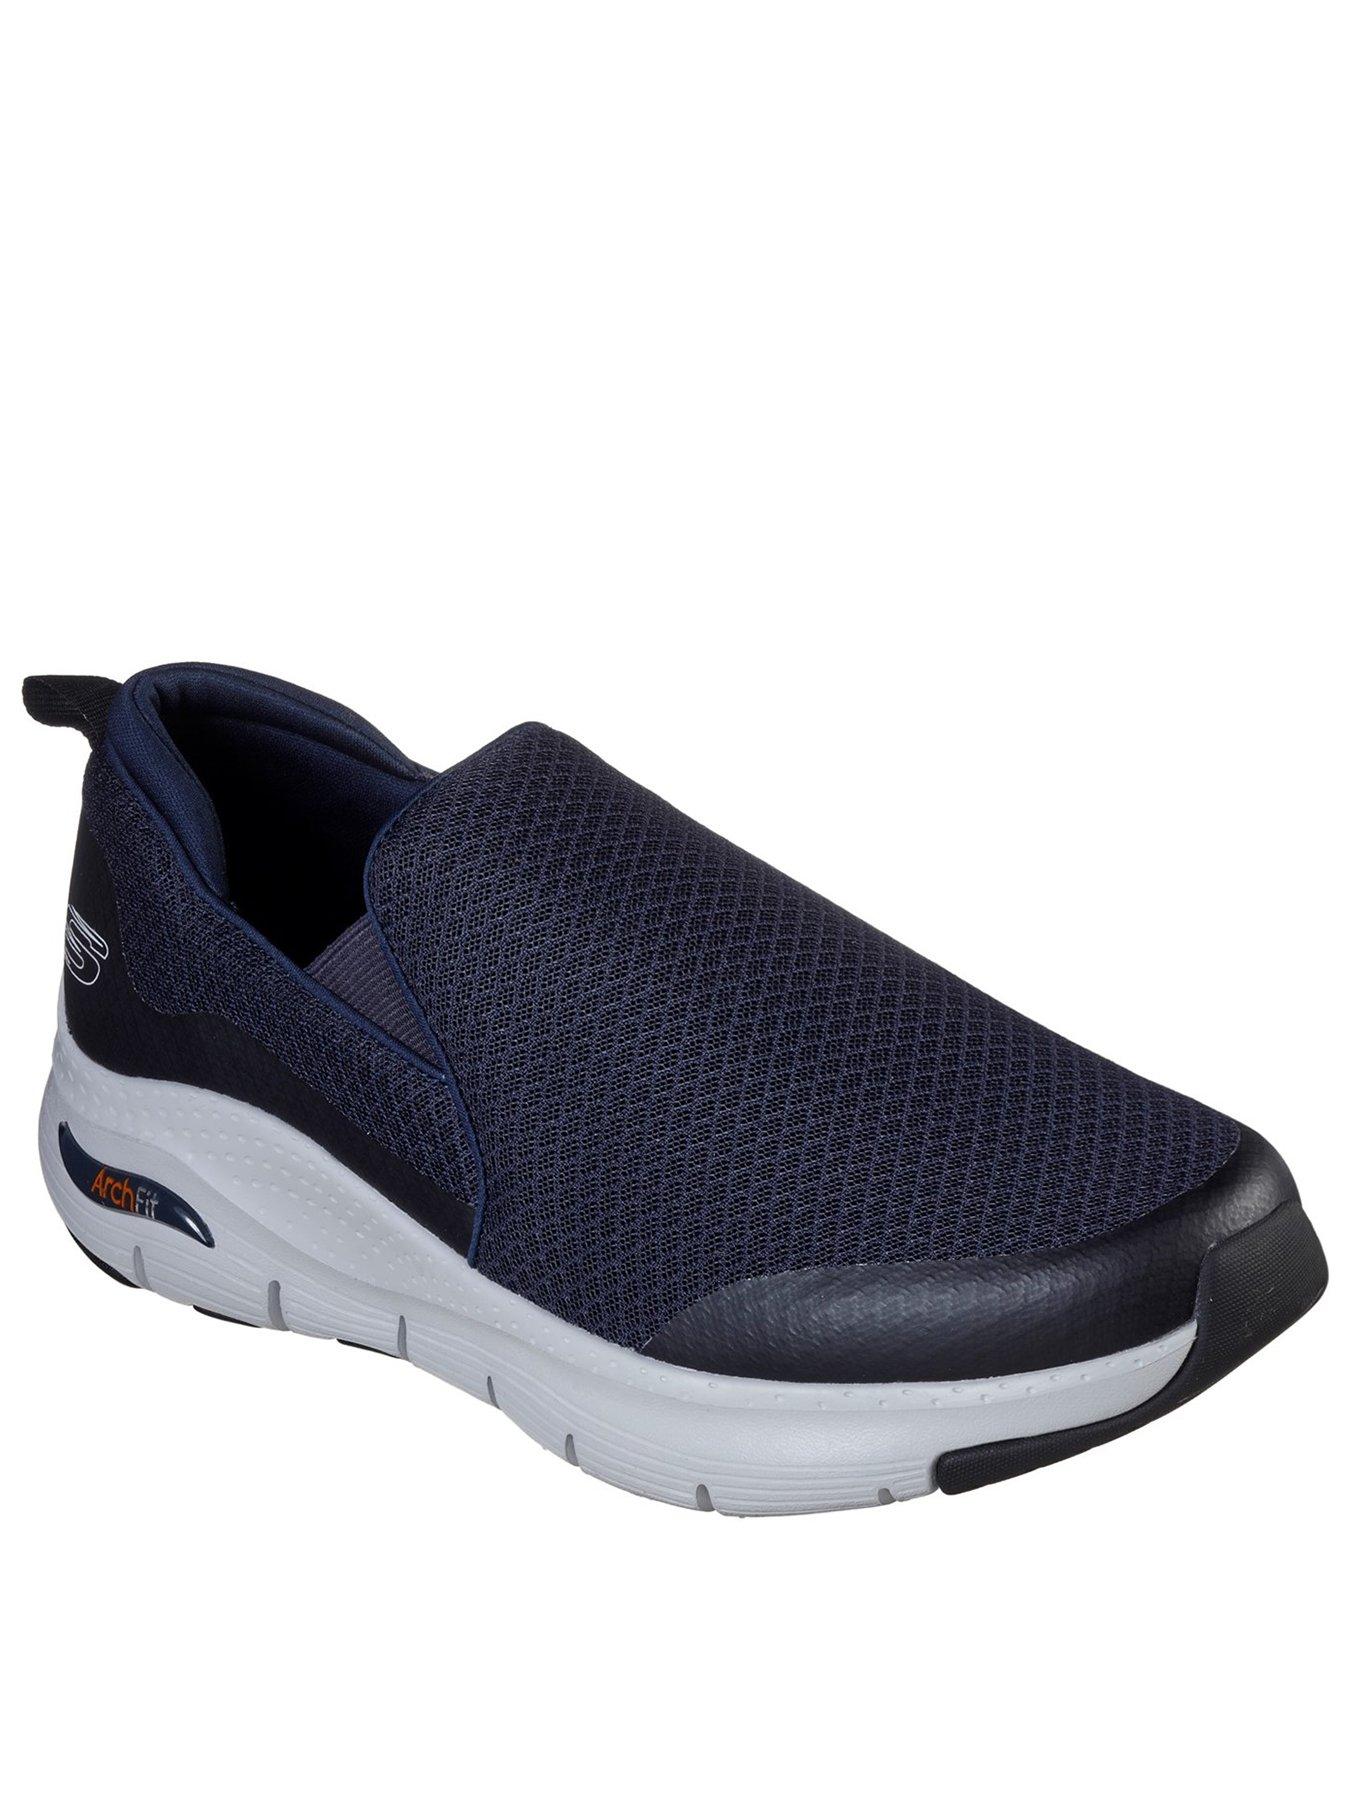  Arch Fit Mesh Twin-Gore Slip-On - Navy